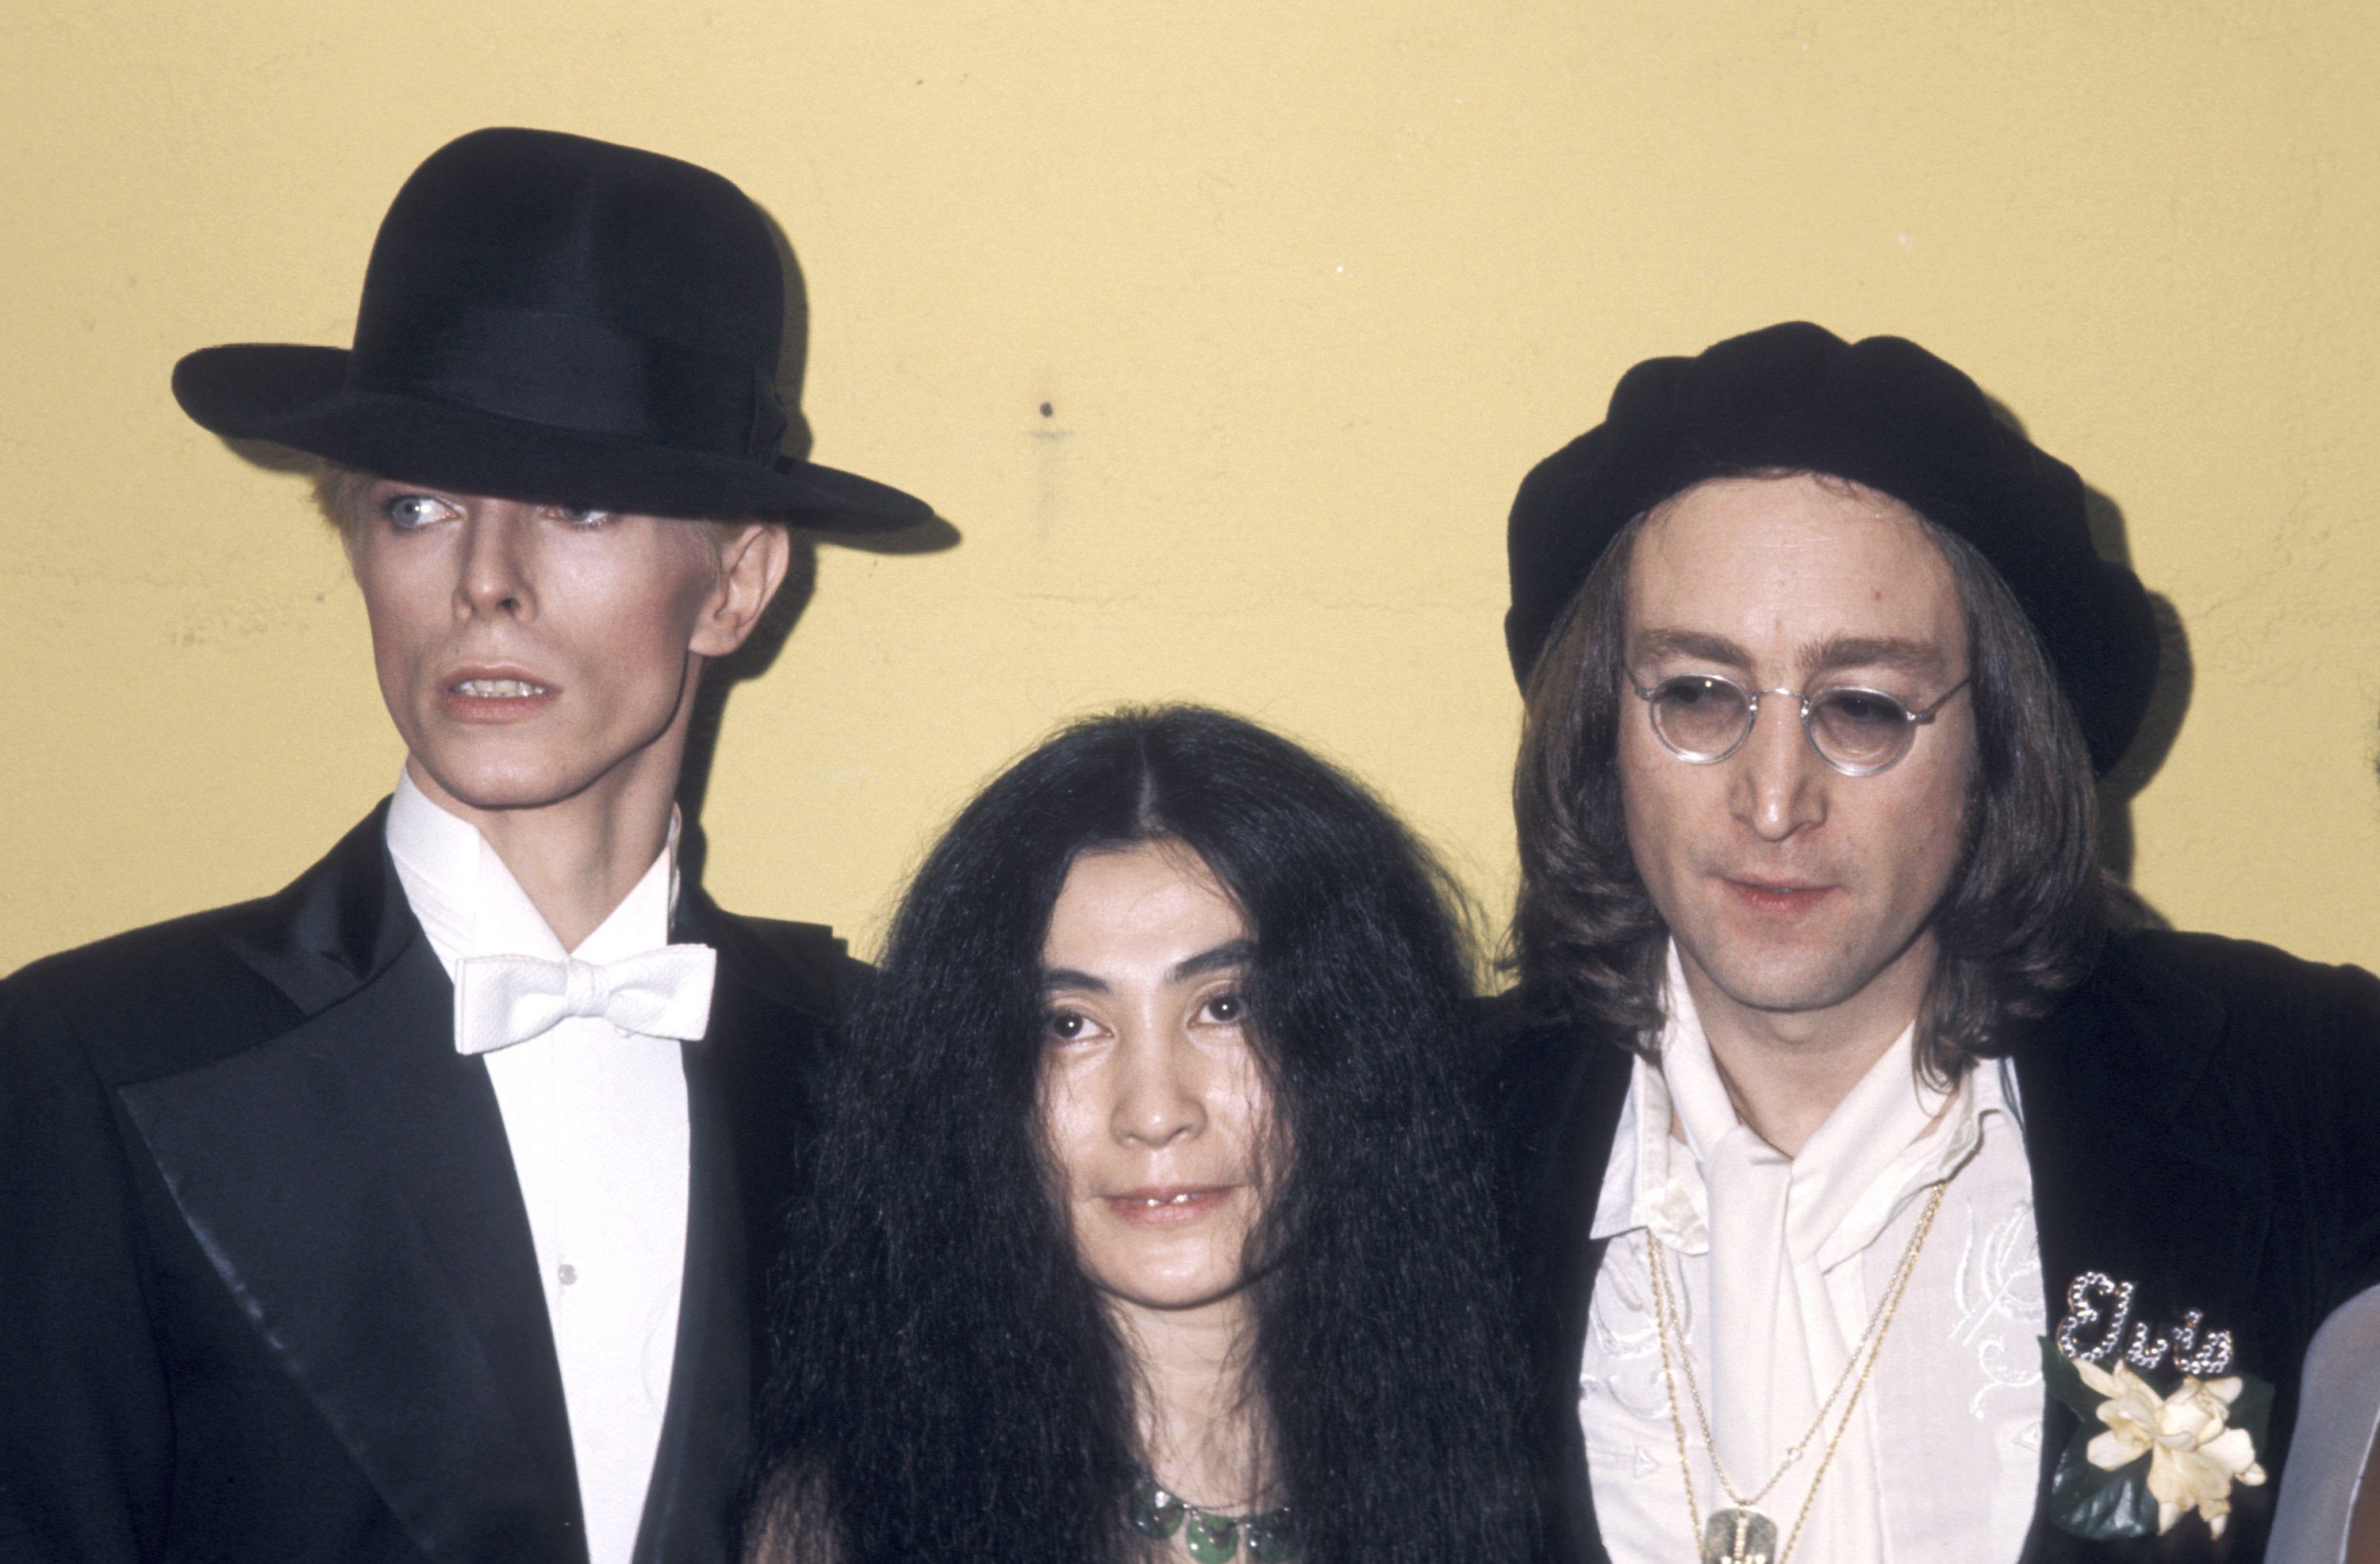 David Bowie, Yoko Ono, and John Lennon at the 17th Annual Grammy Awards